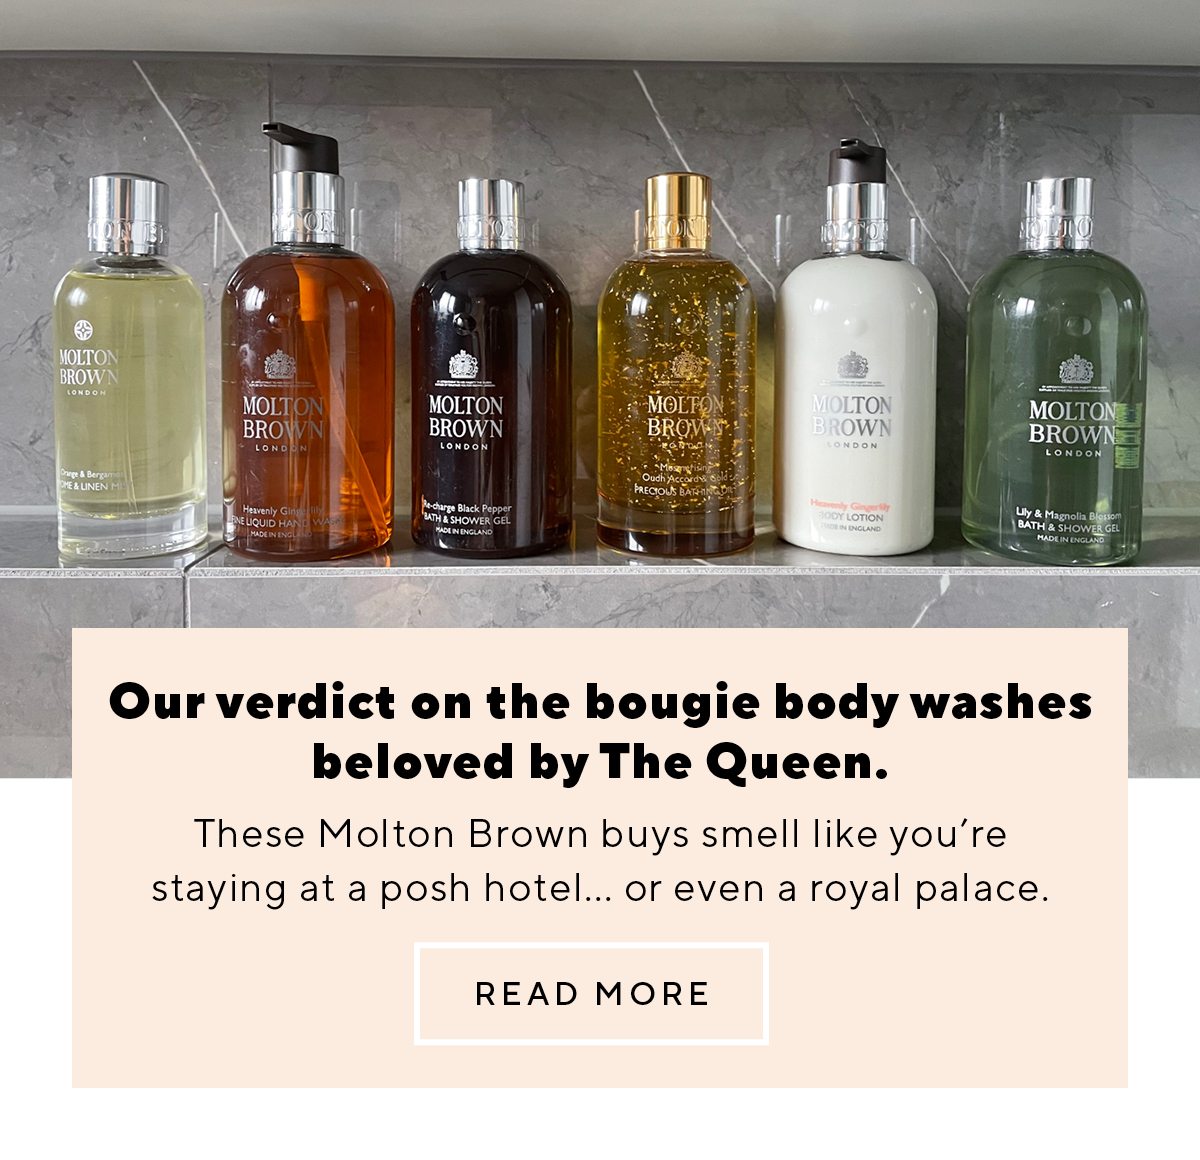 Our verdict on the bougie body washes beloved by The Queen.